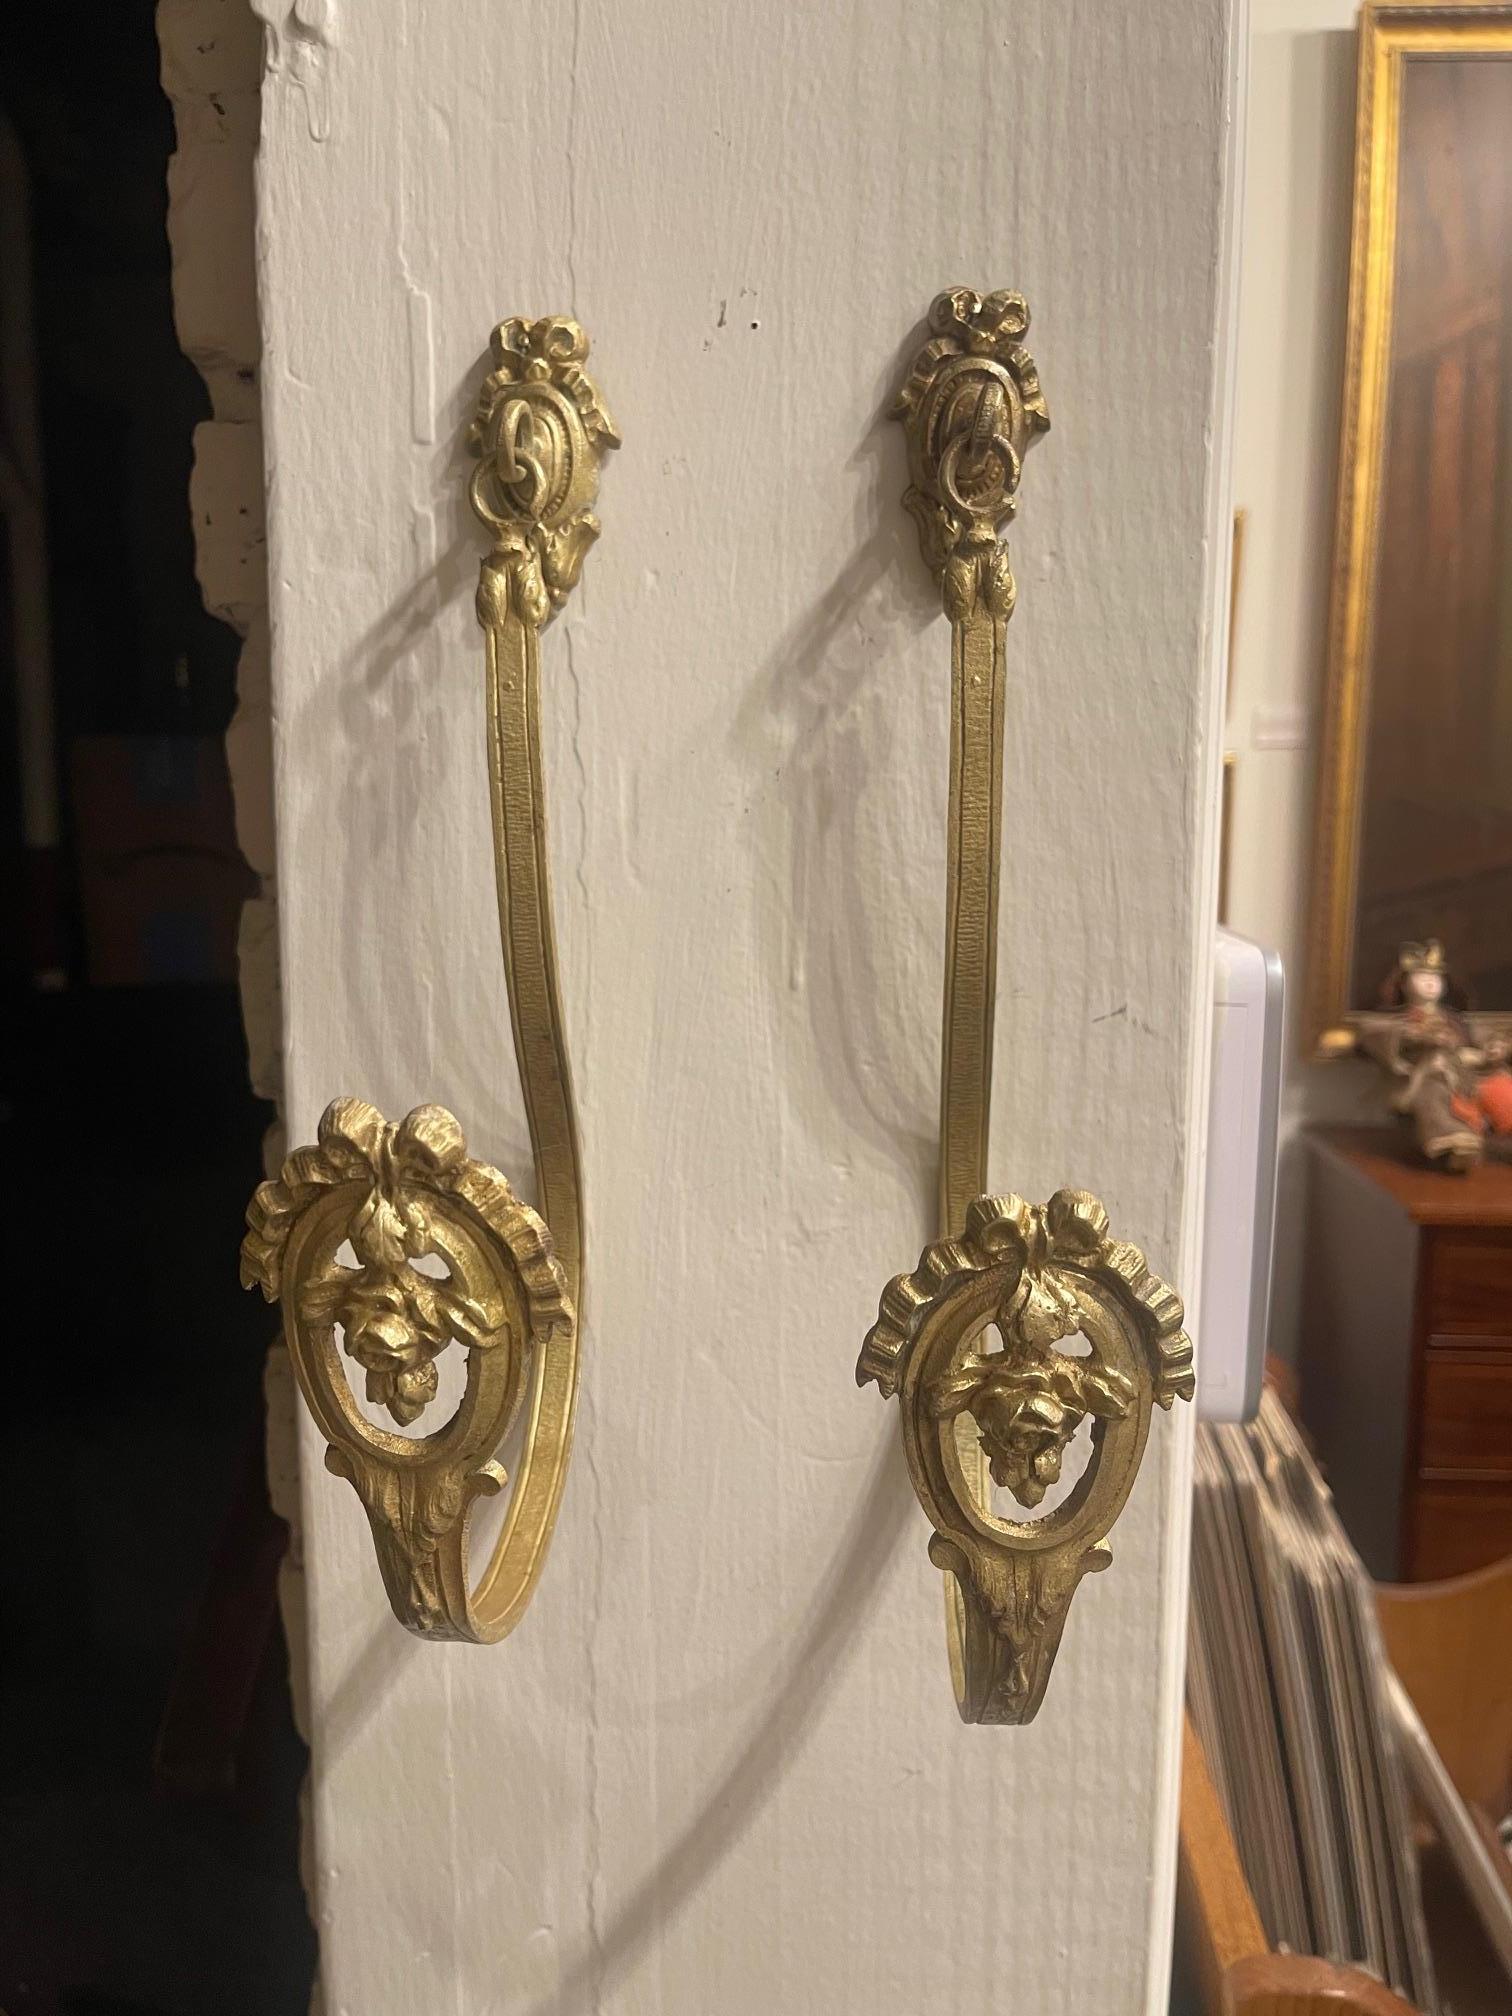 Pair of French Bronze and Brass Curtain Tiebacks or Curtain Holders